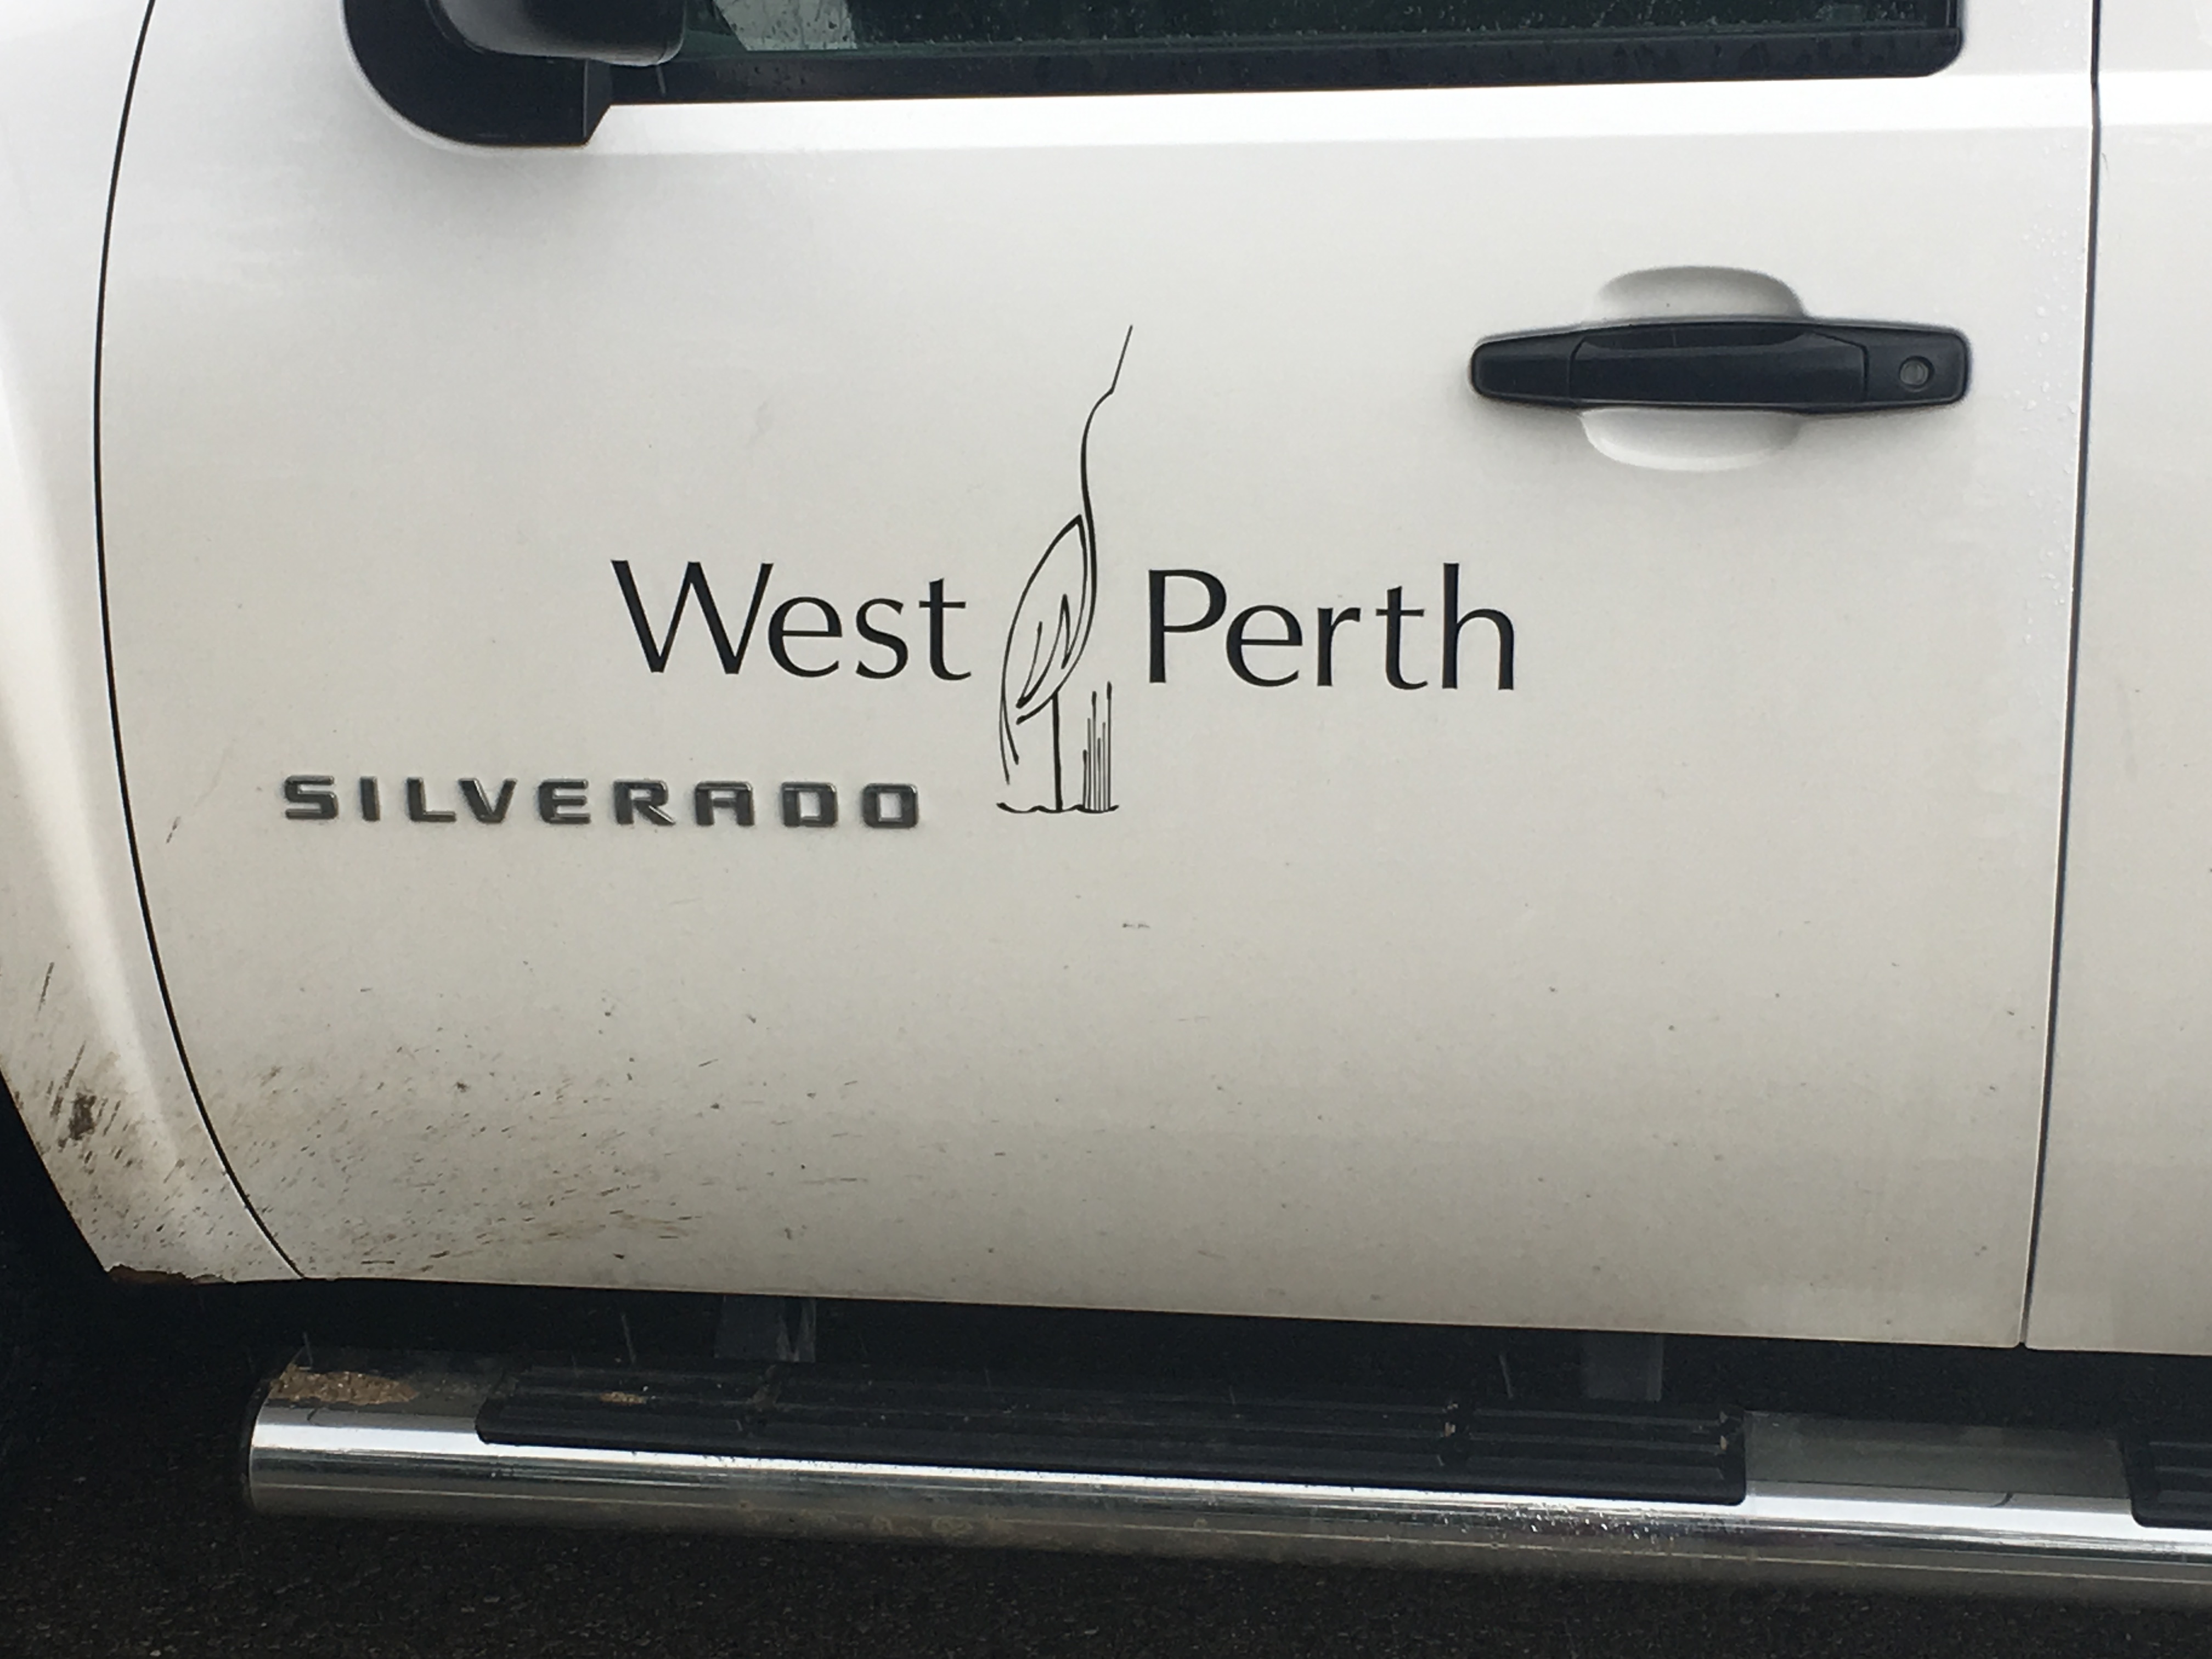 west perth council addressing recent complaint of illegal garbage dumping